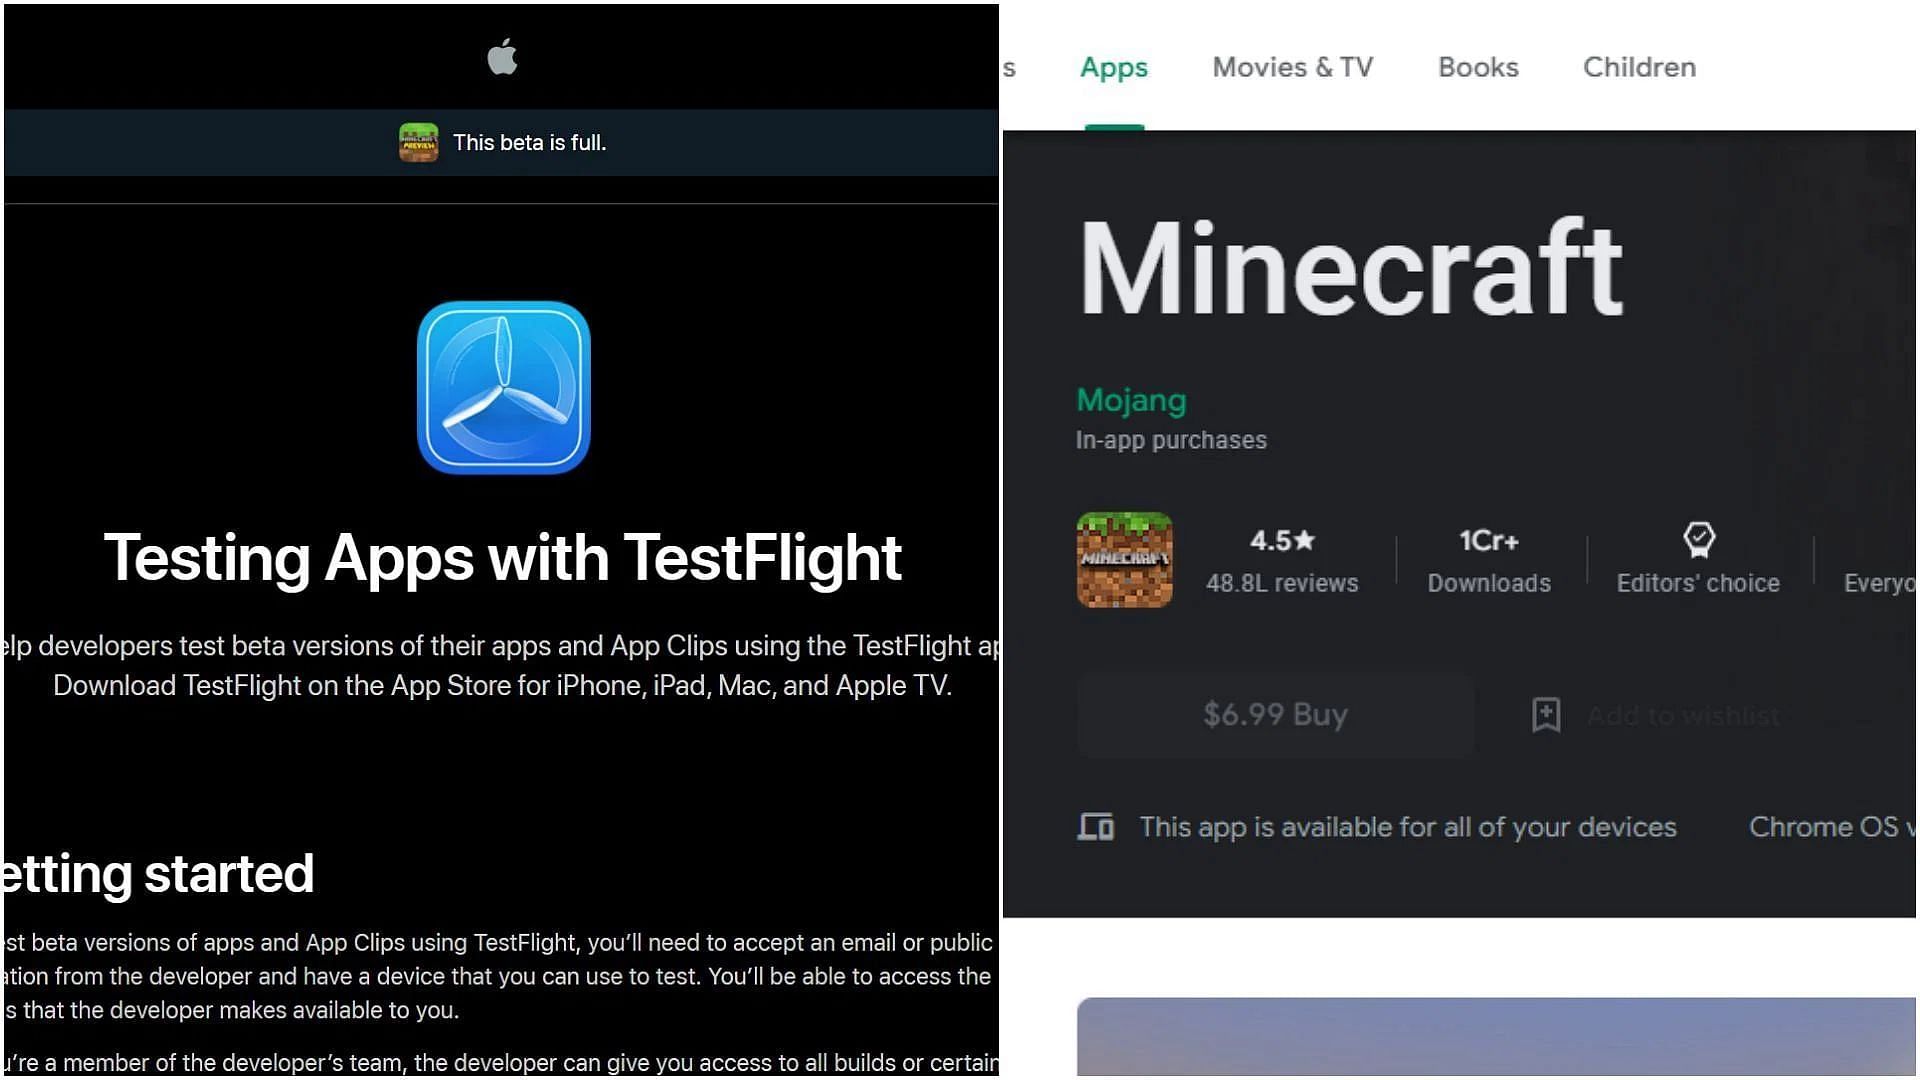 Downloading previews on mobile devices is carried out via respective app stores (Image via Mojang/Apple/Google)